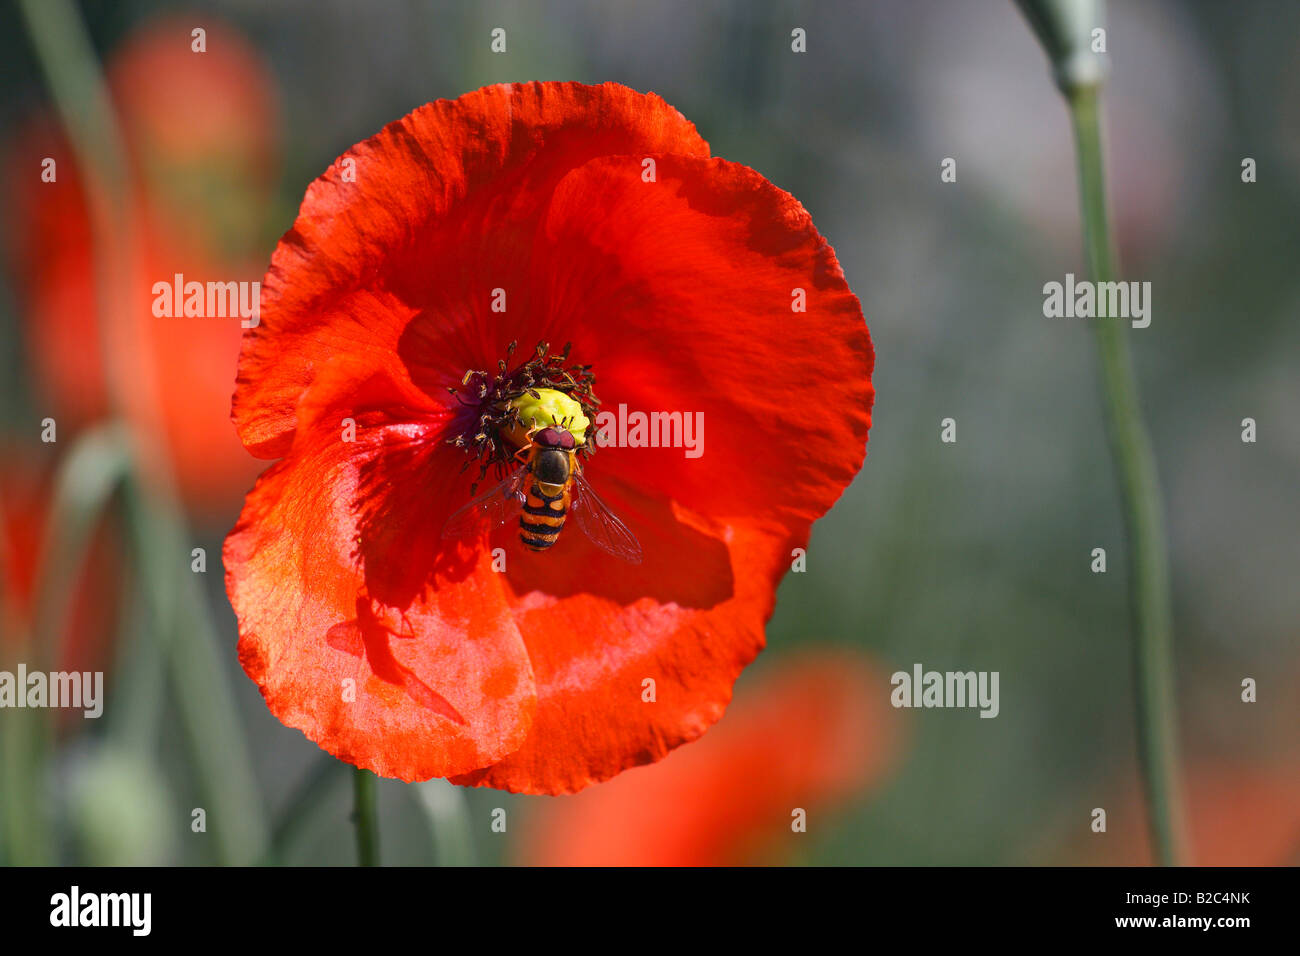 Hoverfly (Syrphidae) on a blossom of a Long-Headed Poppy (Papaver dubium), wild plant Stock Photo